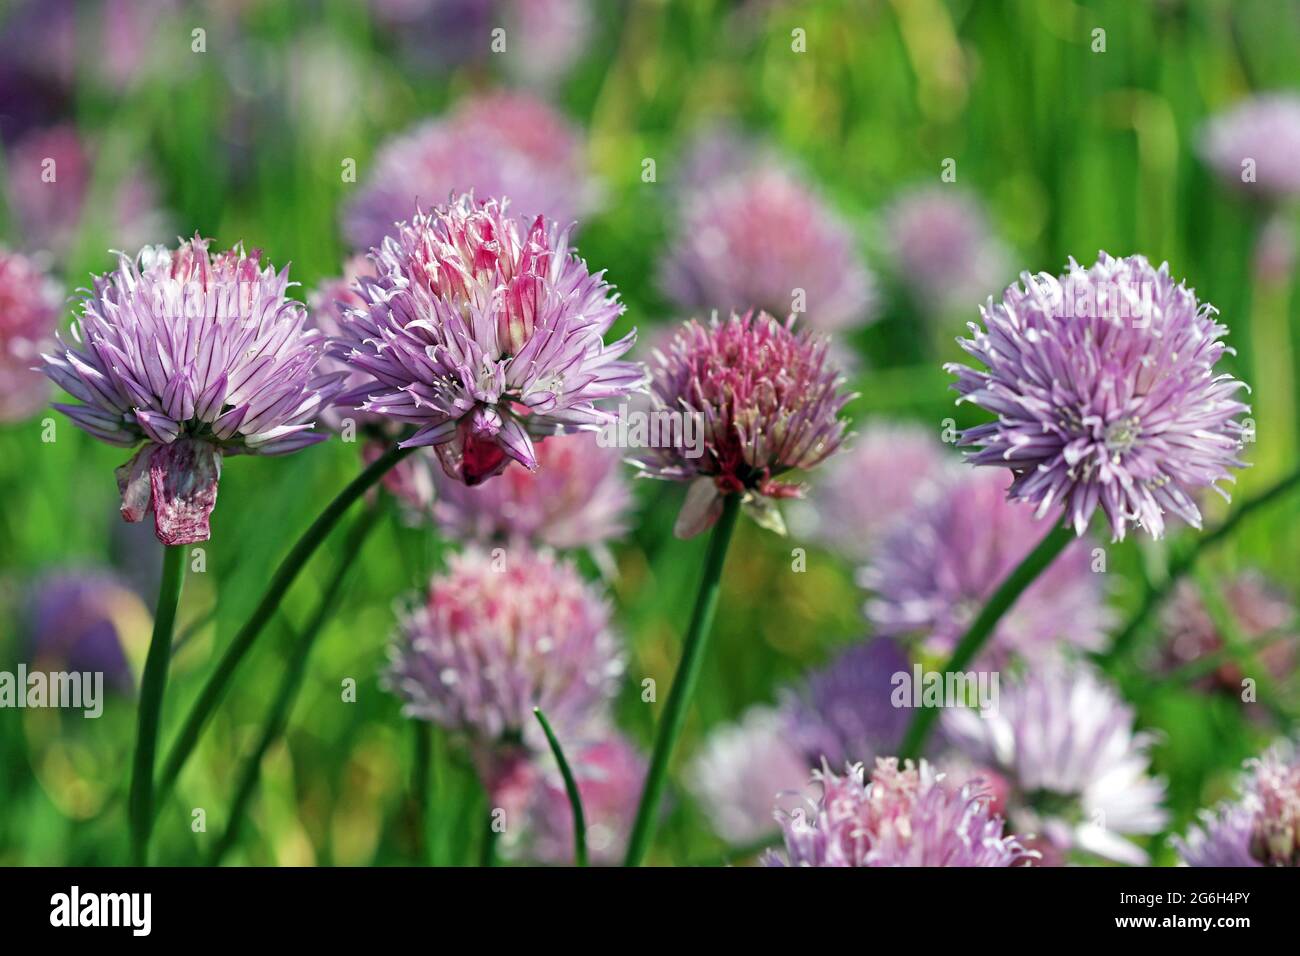 A group of flowering chives (Allium Schoenoprasum); small lavender allium which have wide culinary uses.  Photographed in an English garden in June Stock Photo